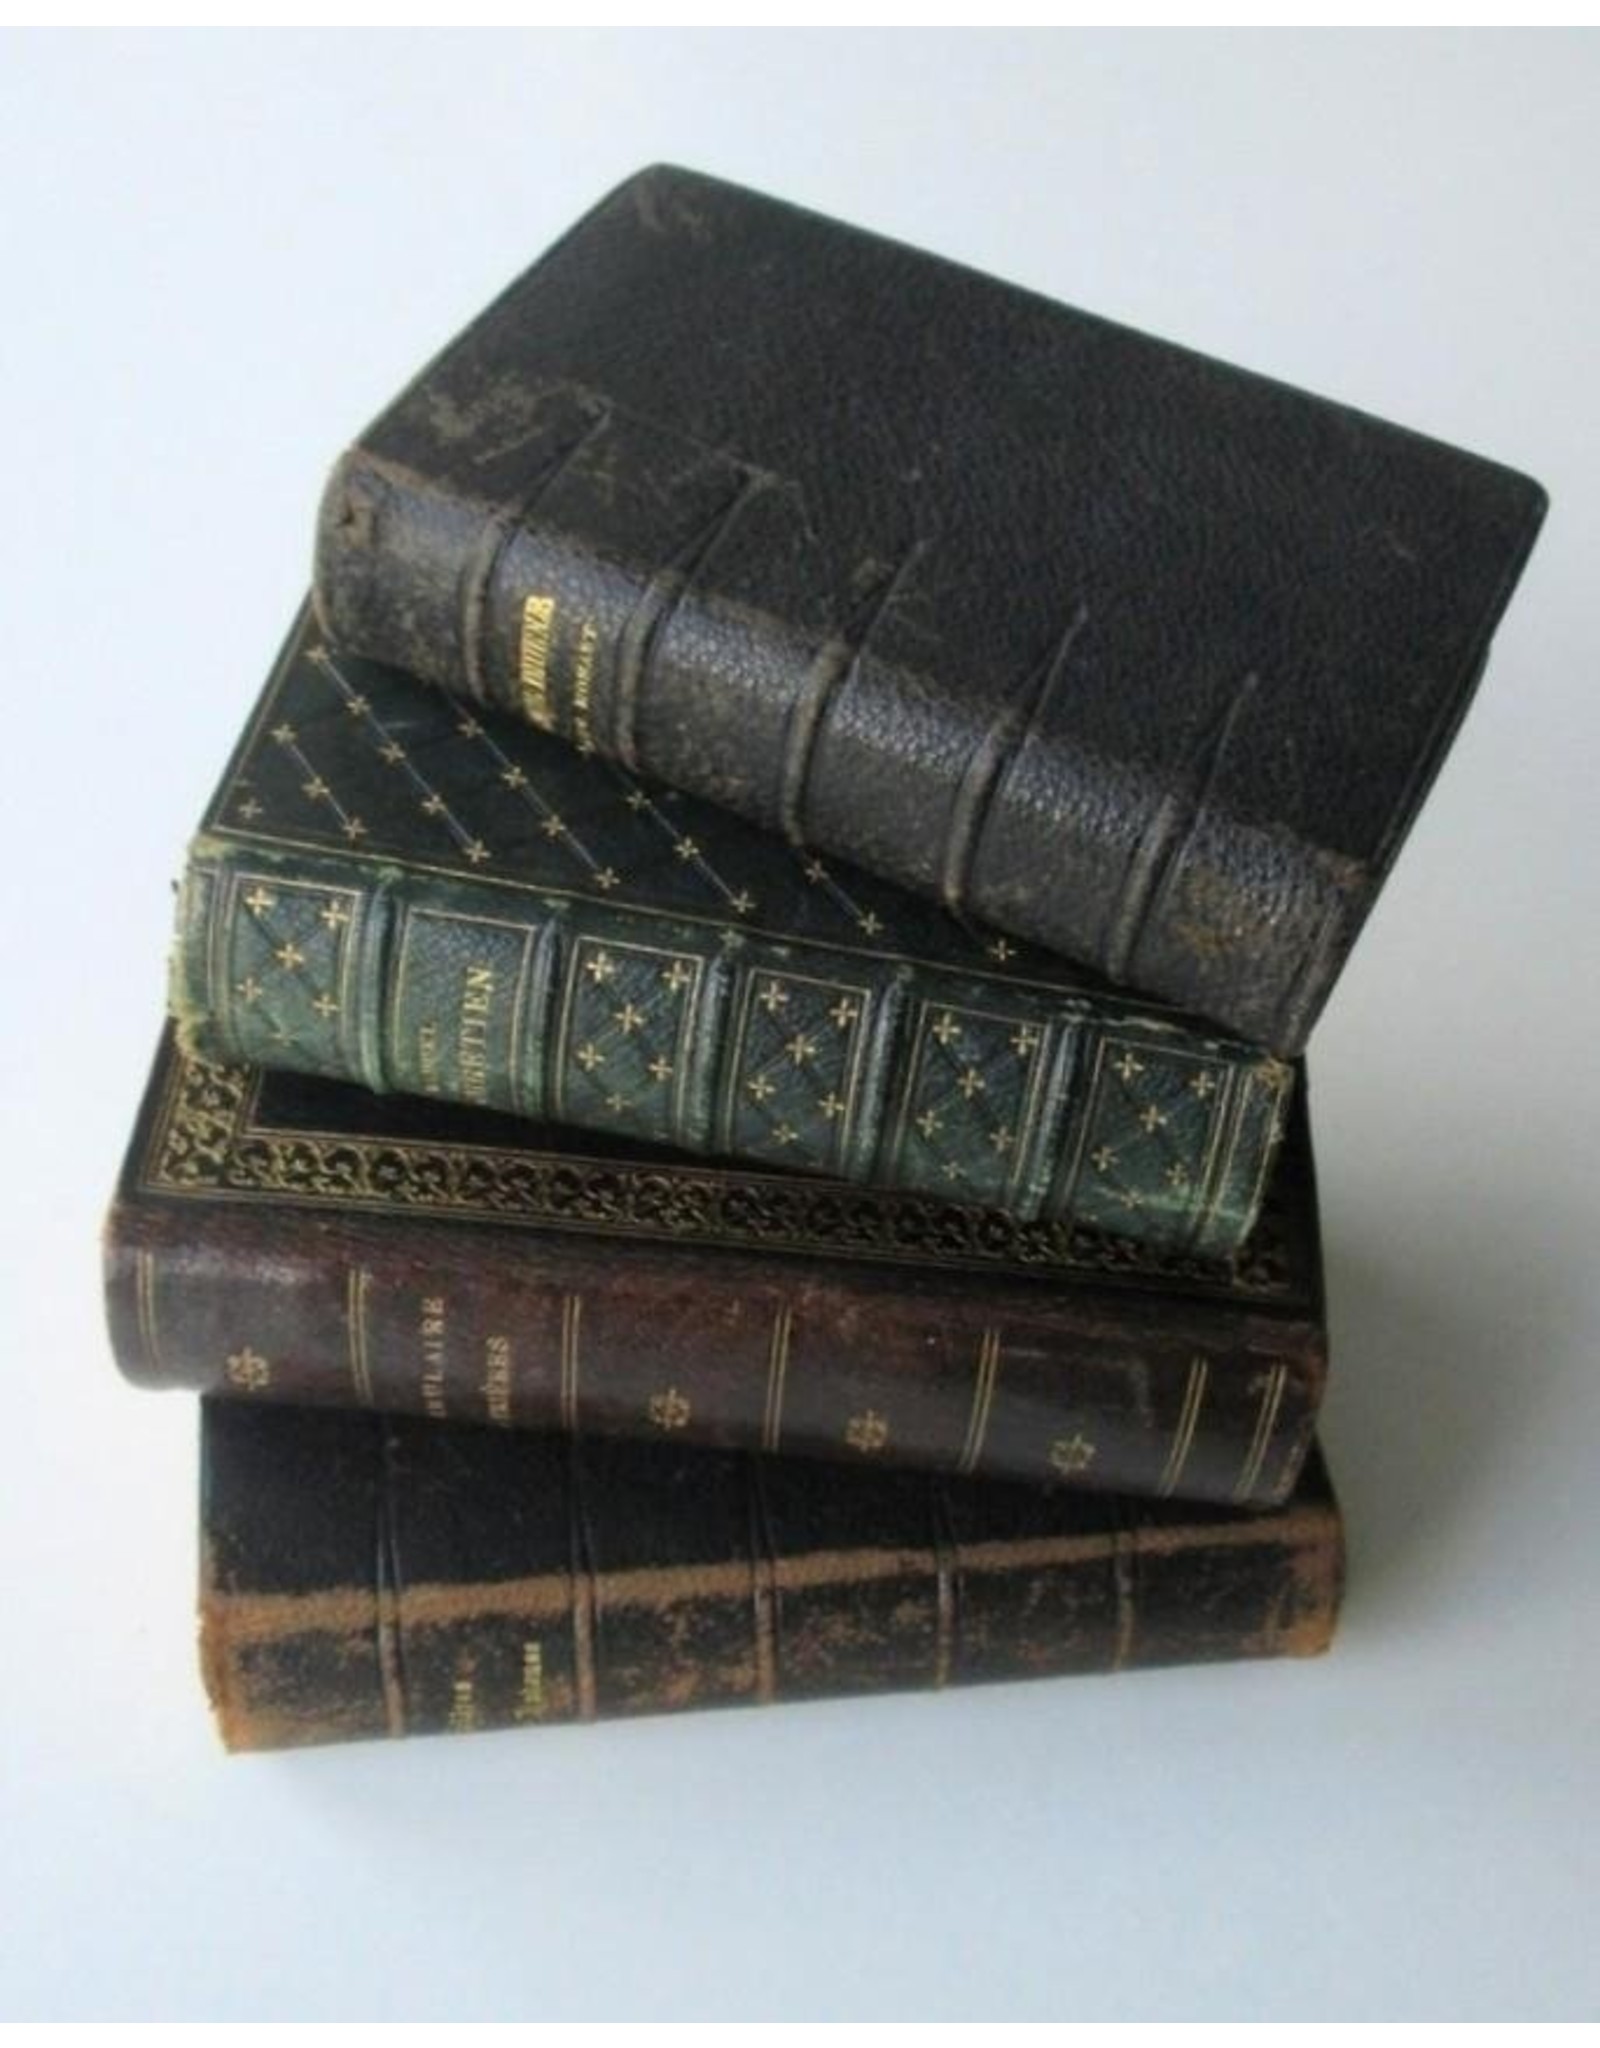 [Book bindings] Lot with 4 old French prayer books